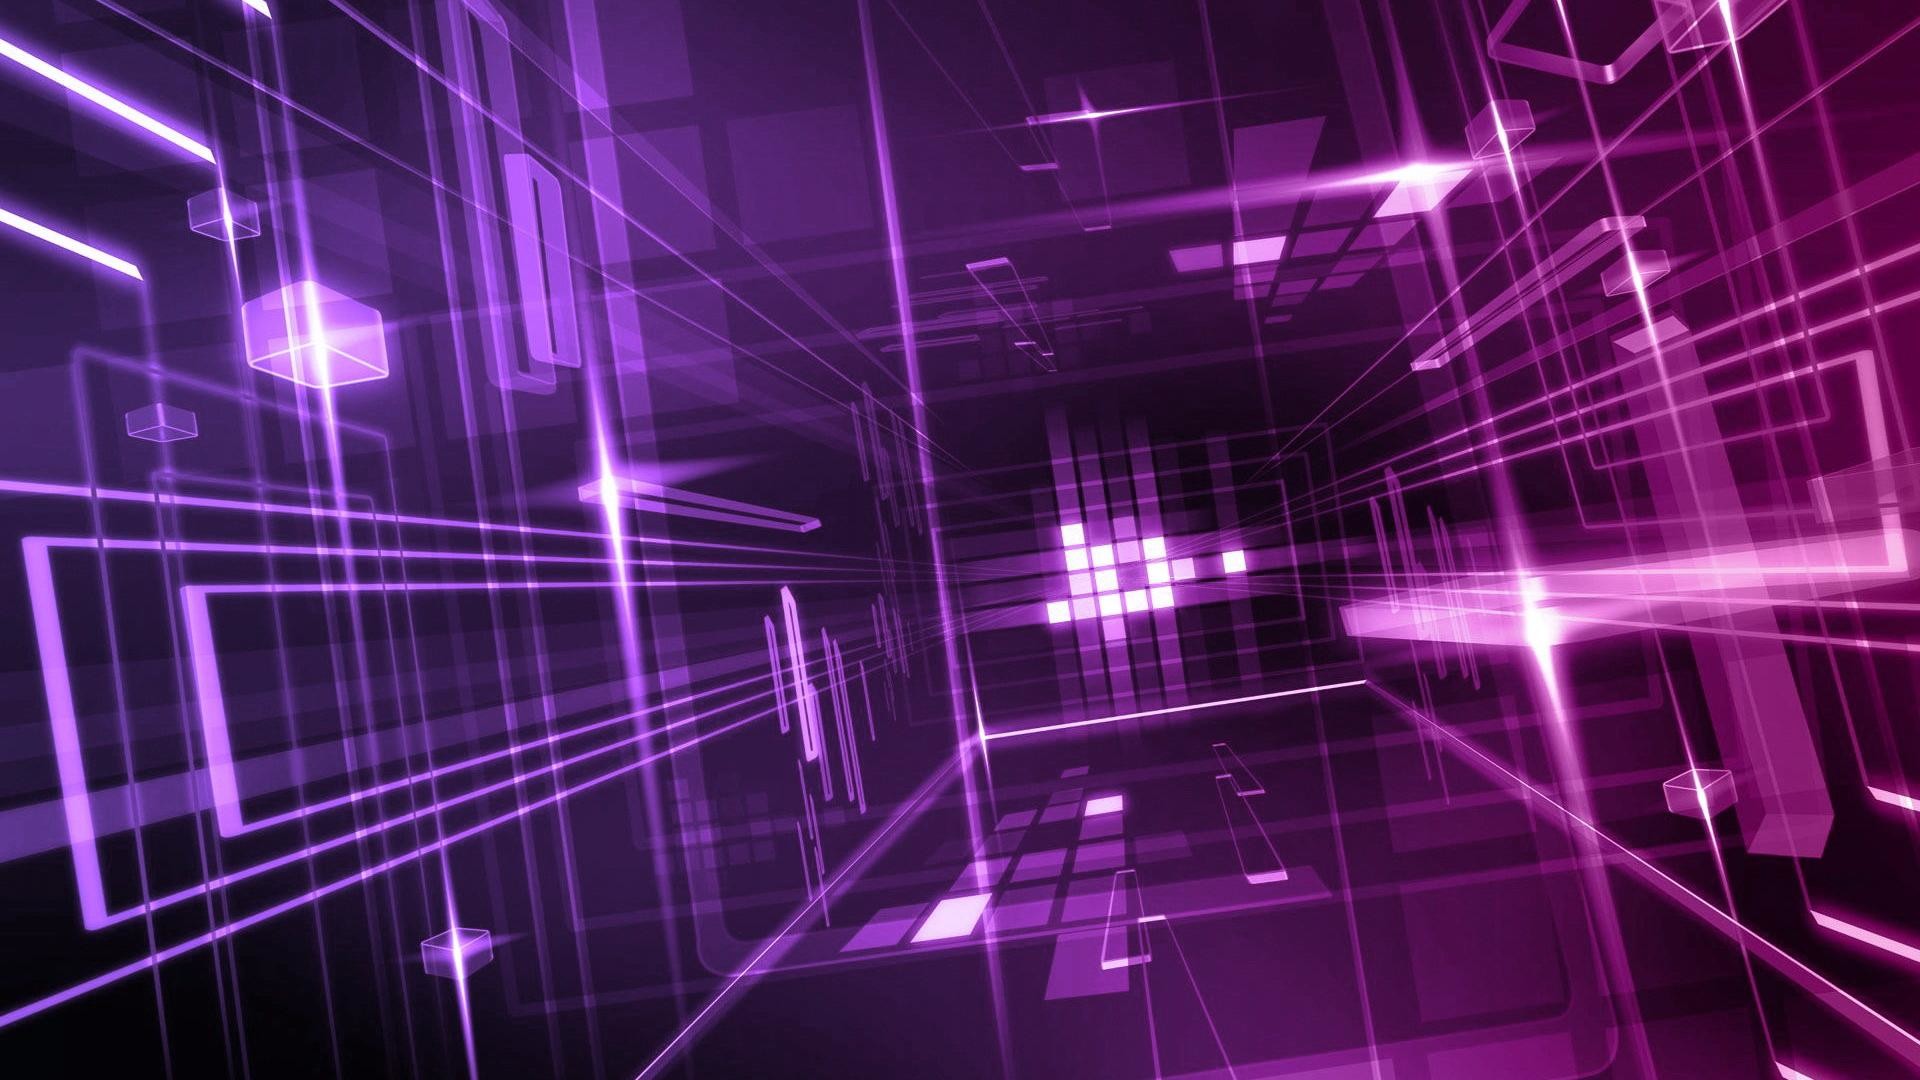 1920x1080  purple 3d design backgrounds wide wallpapers:1280x800,1440x900,1680x1050  - hd backgrounds